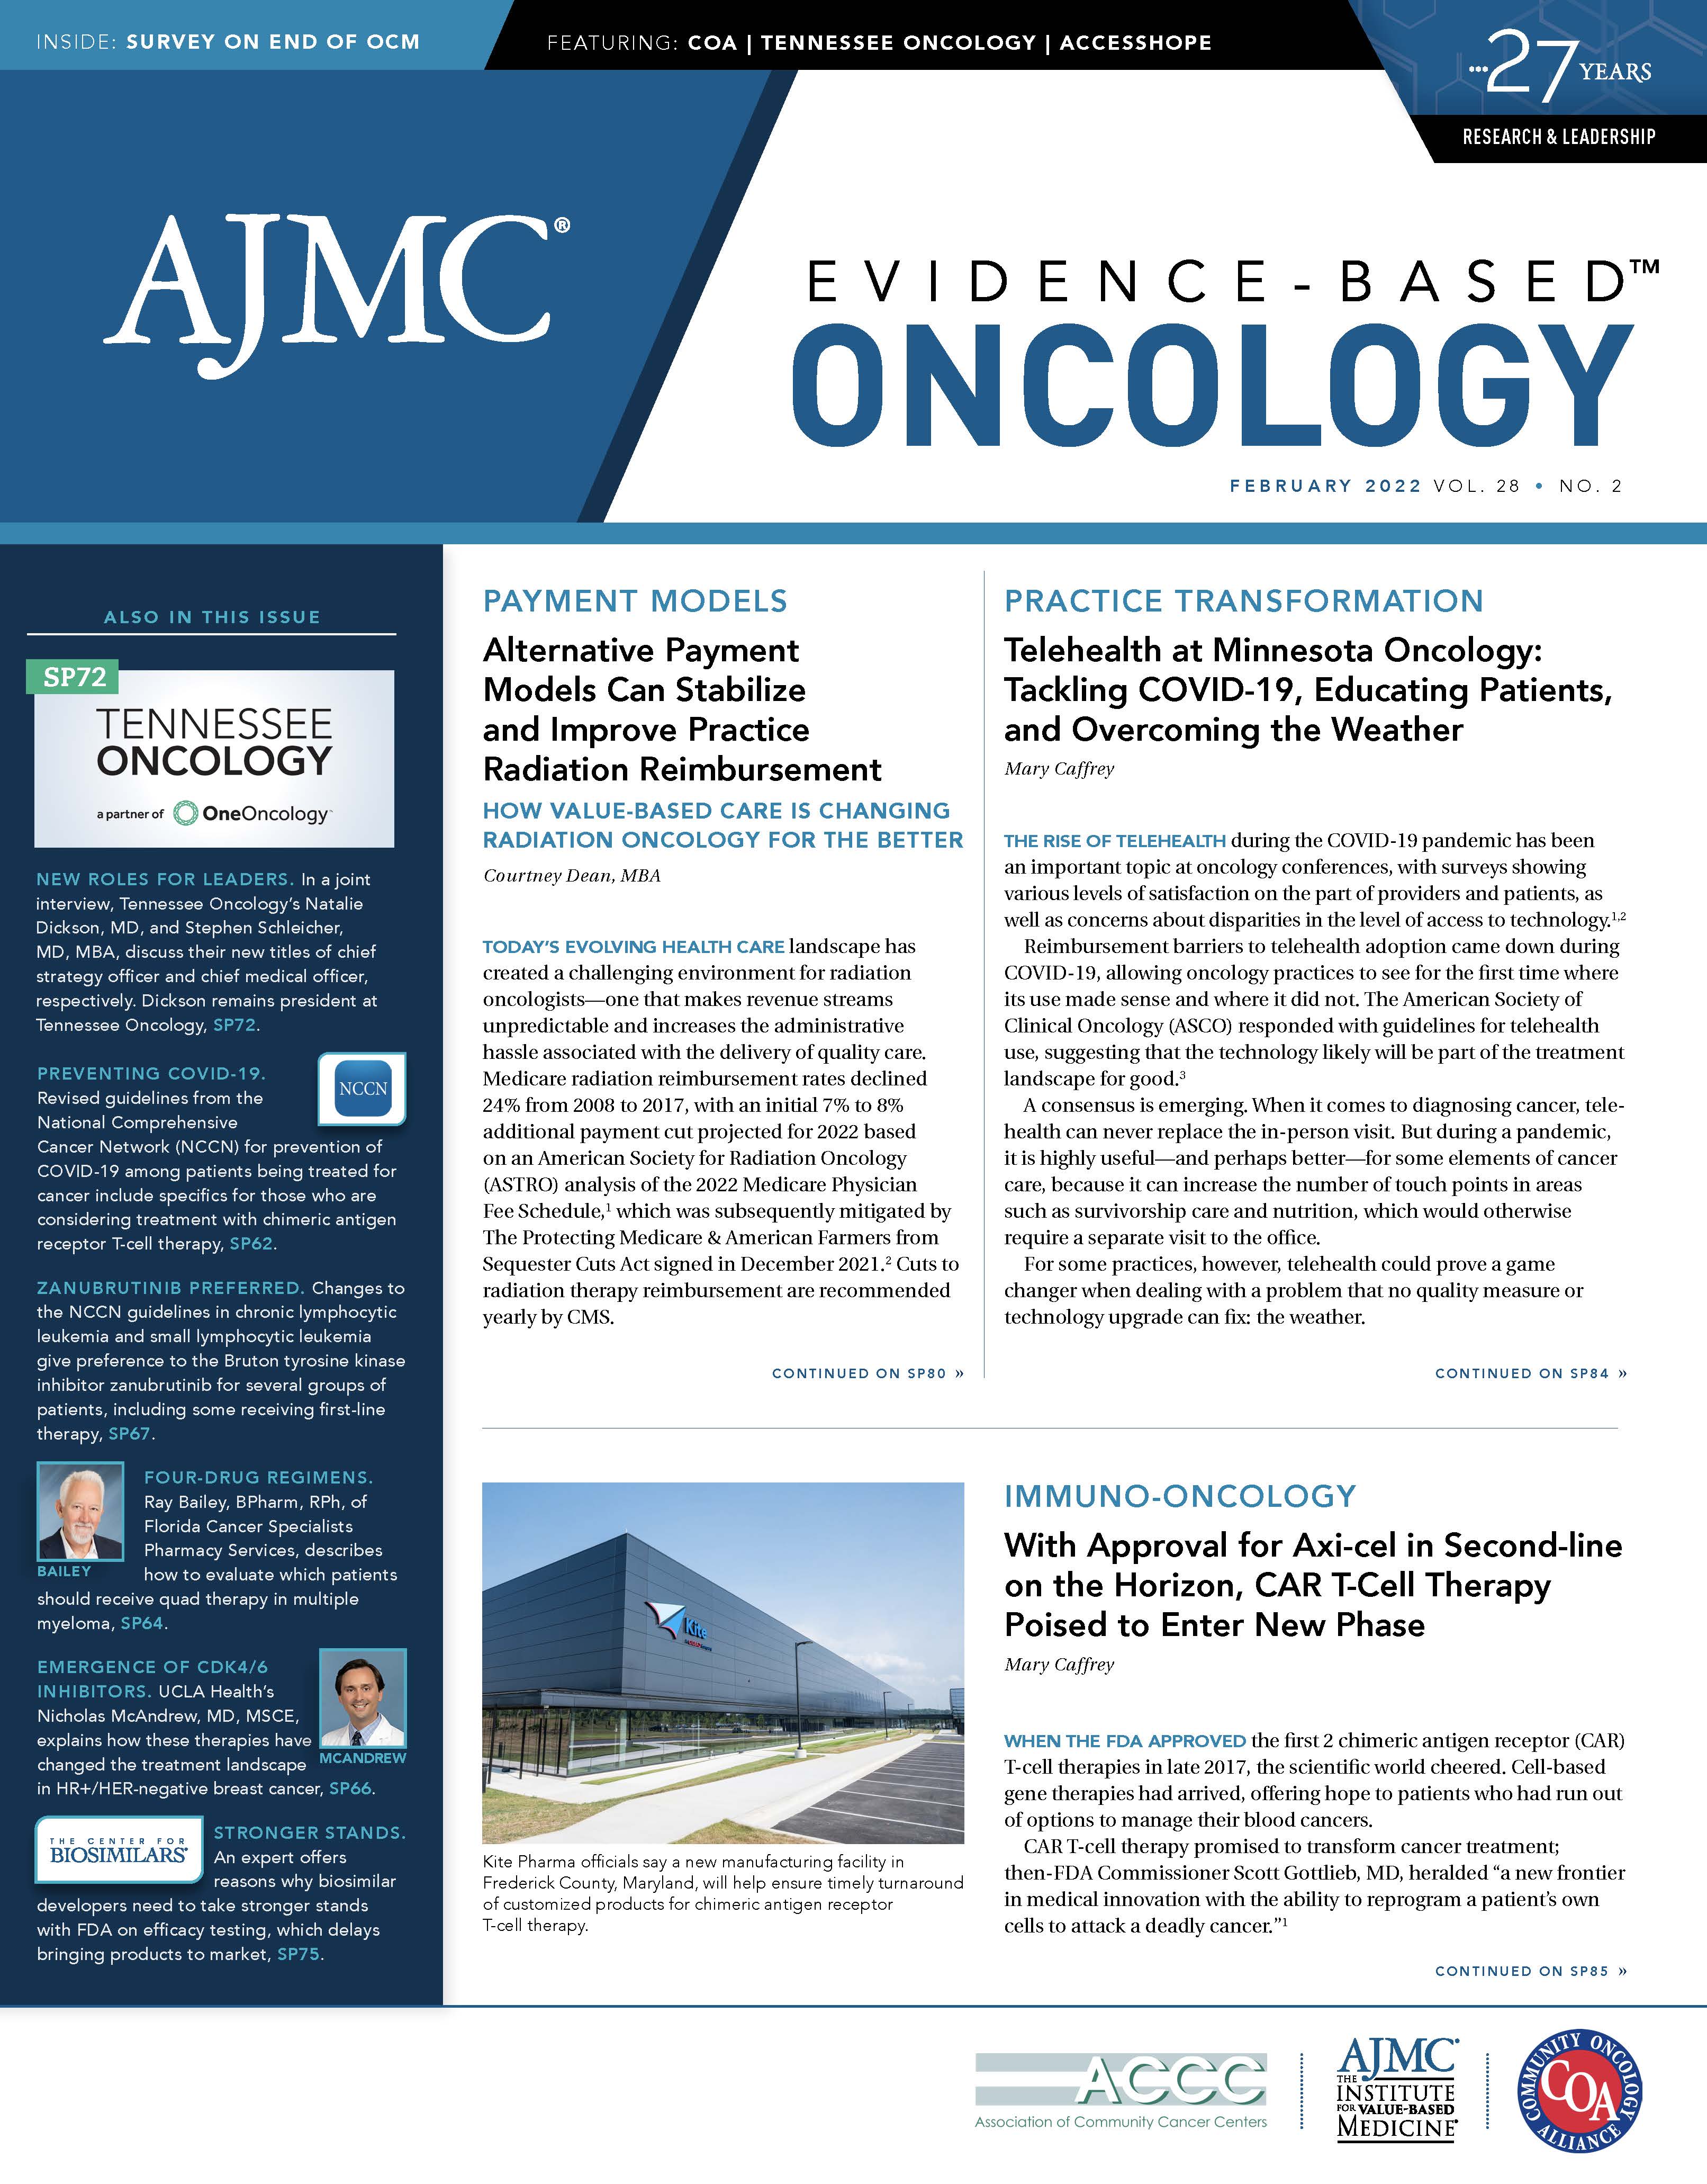 Cover of Evidence-Based Oncology